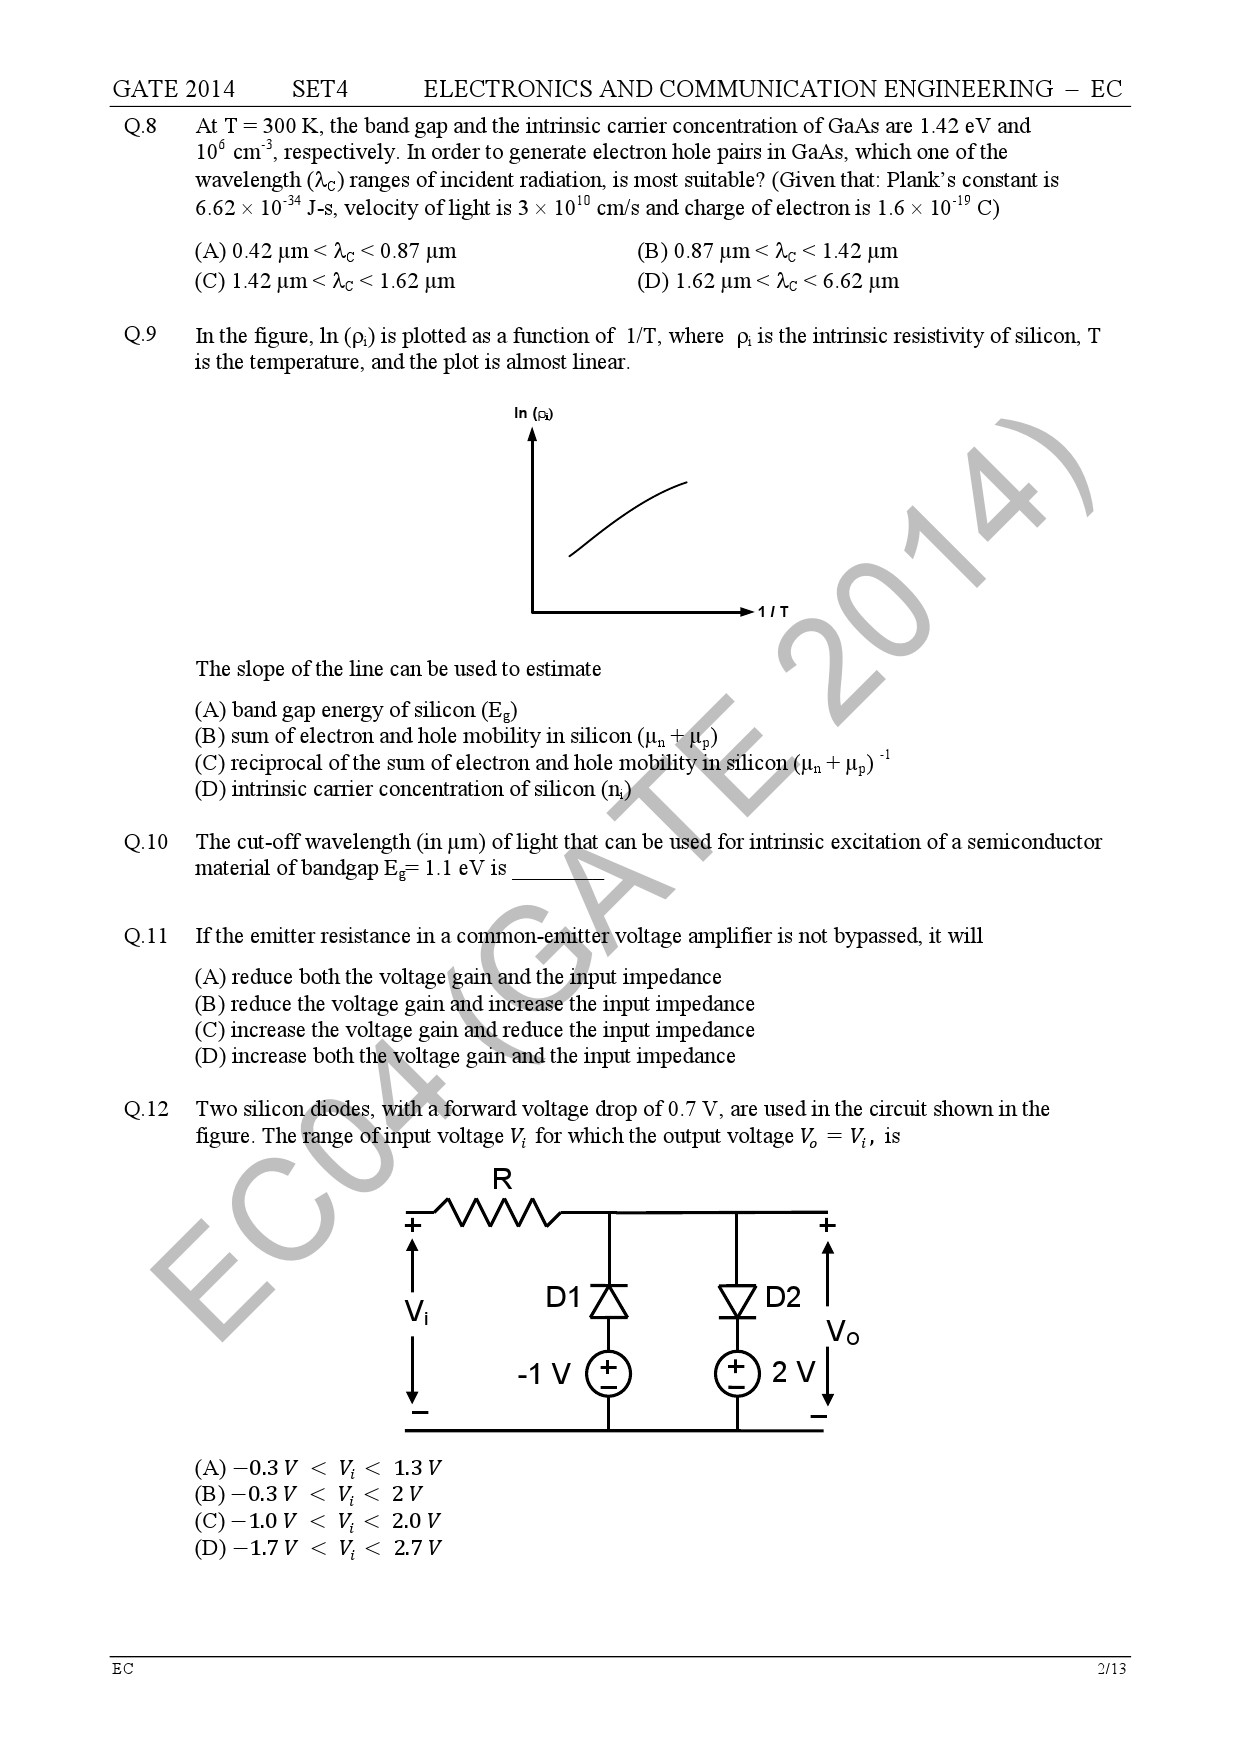 GATE Exam Question Paper 2014 Electronics and Communication Engineering Set 4 8